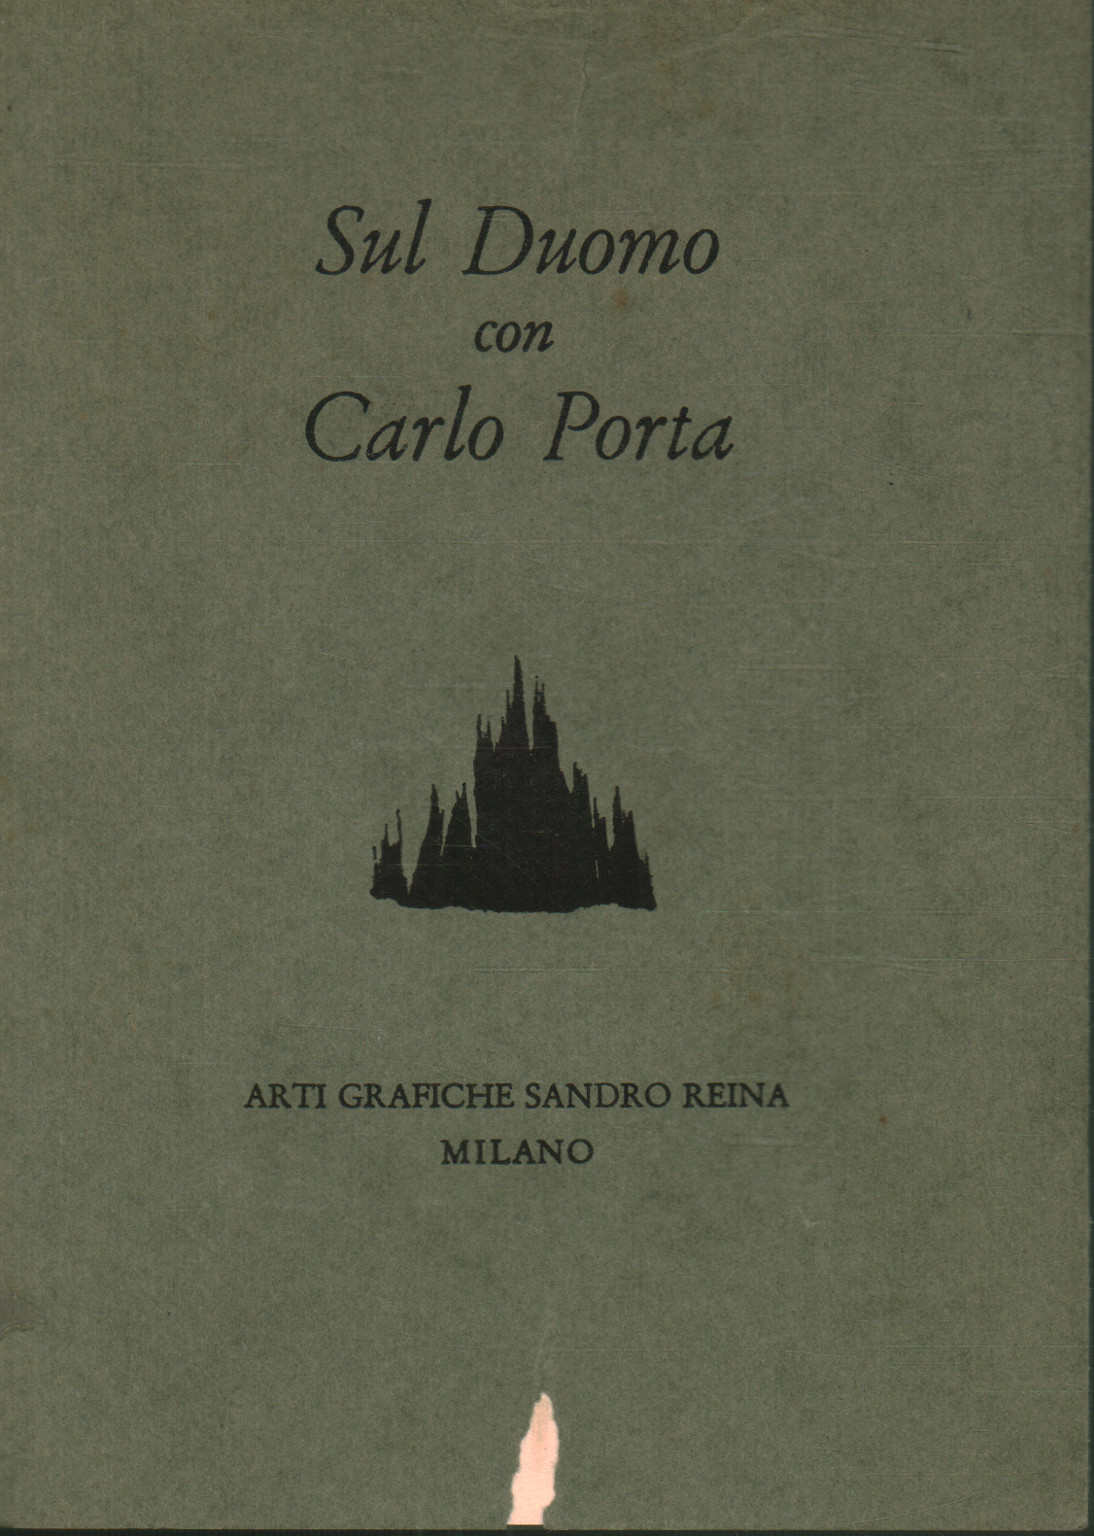 On the Duomo with Carlo Porta. Letter to Tommaso Gross, Carlo Porta